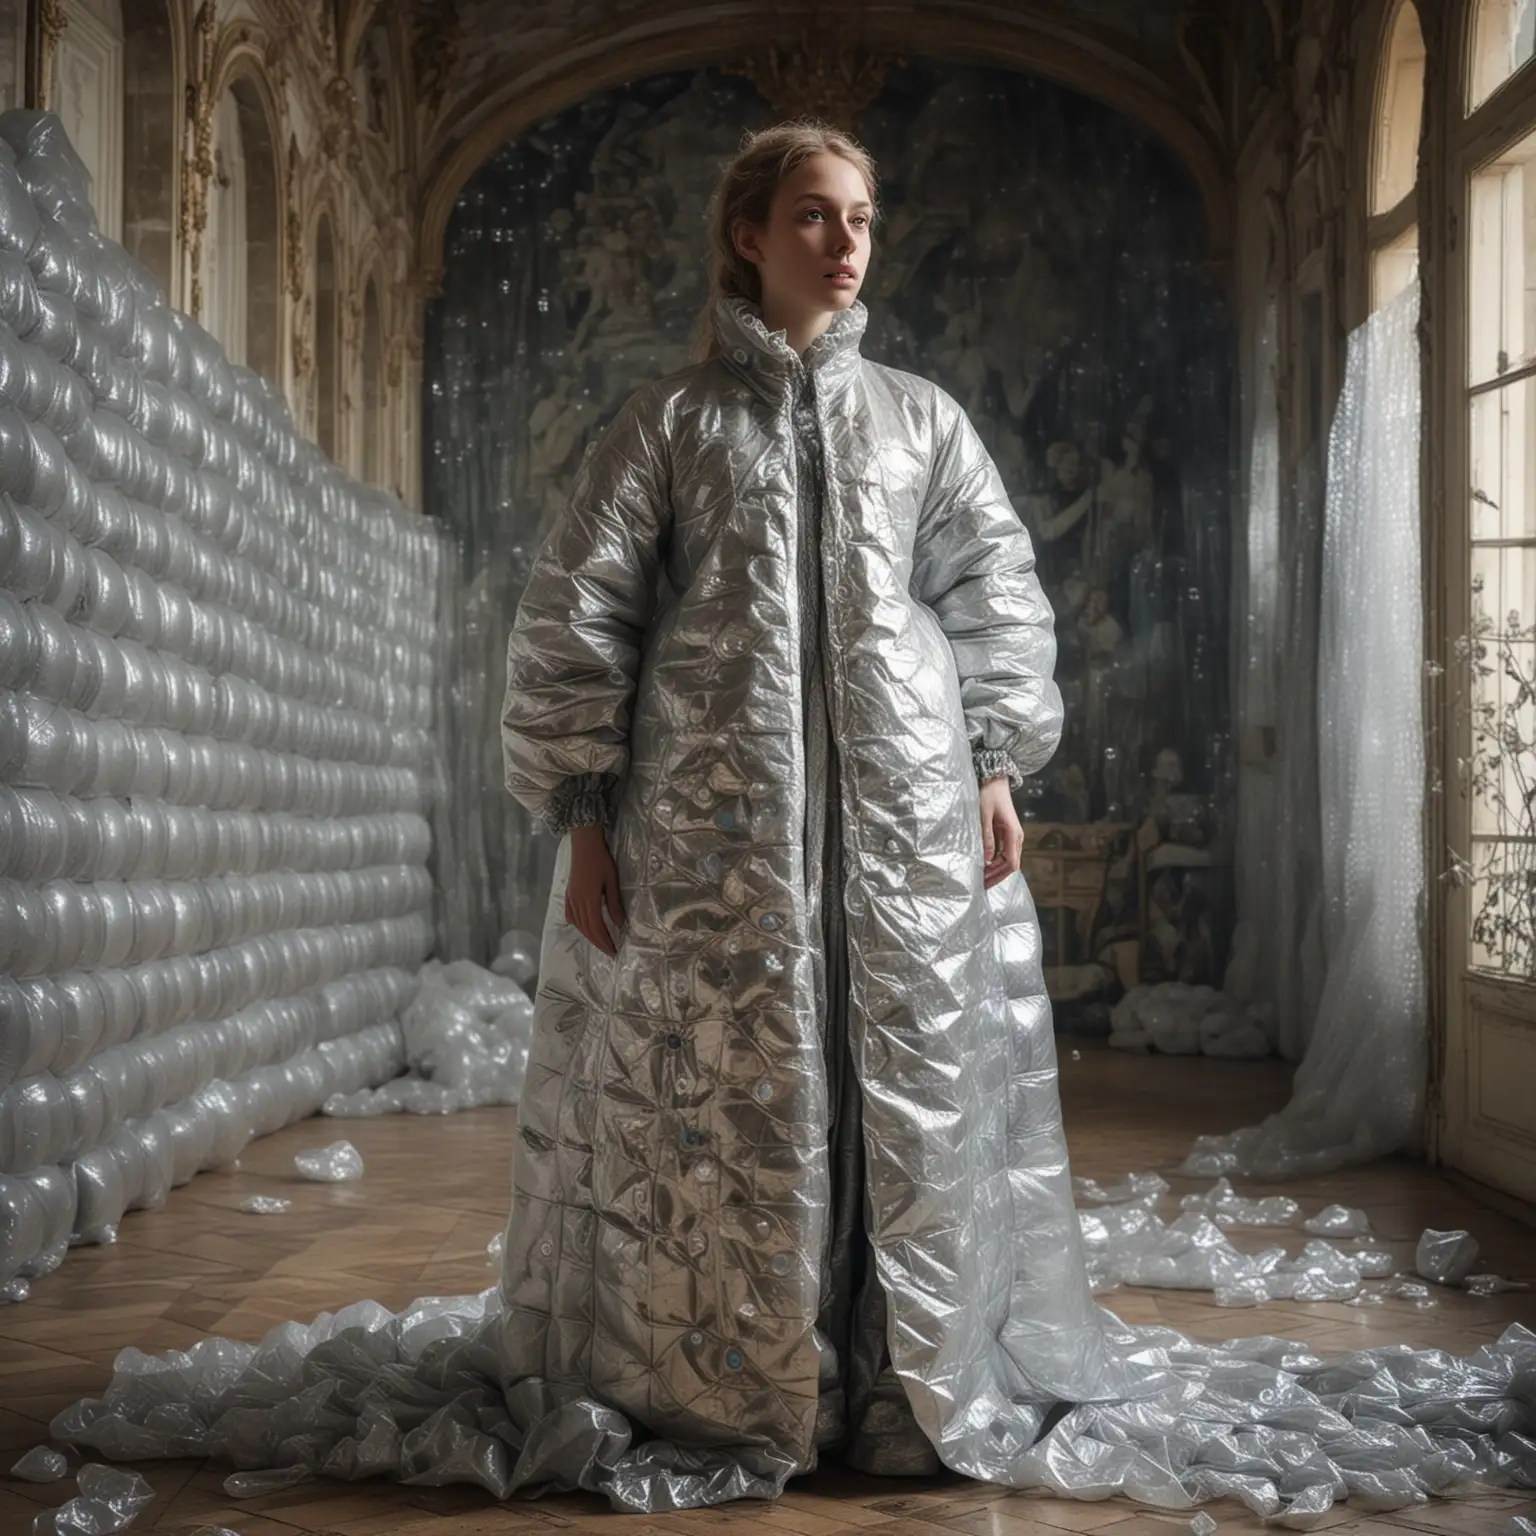 Surrealistic-French-Palace-Scene-with-BubbleWrap-Walls-featuring-a-RadioheadInspired-Woman-in-Detailed-18th-Century-Attire